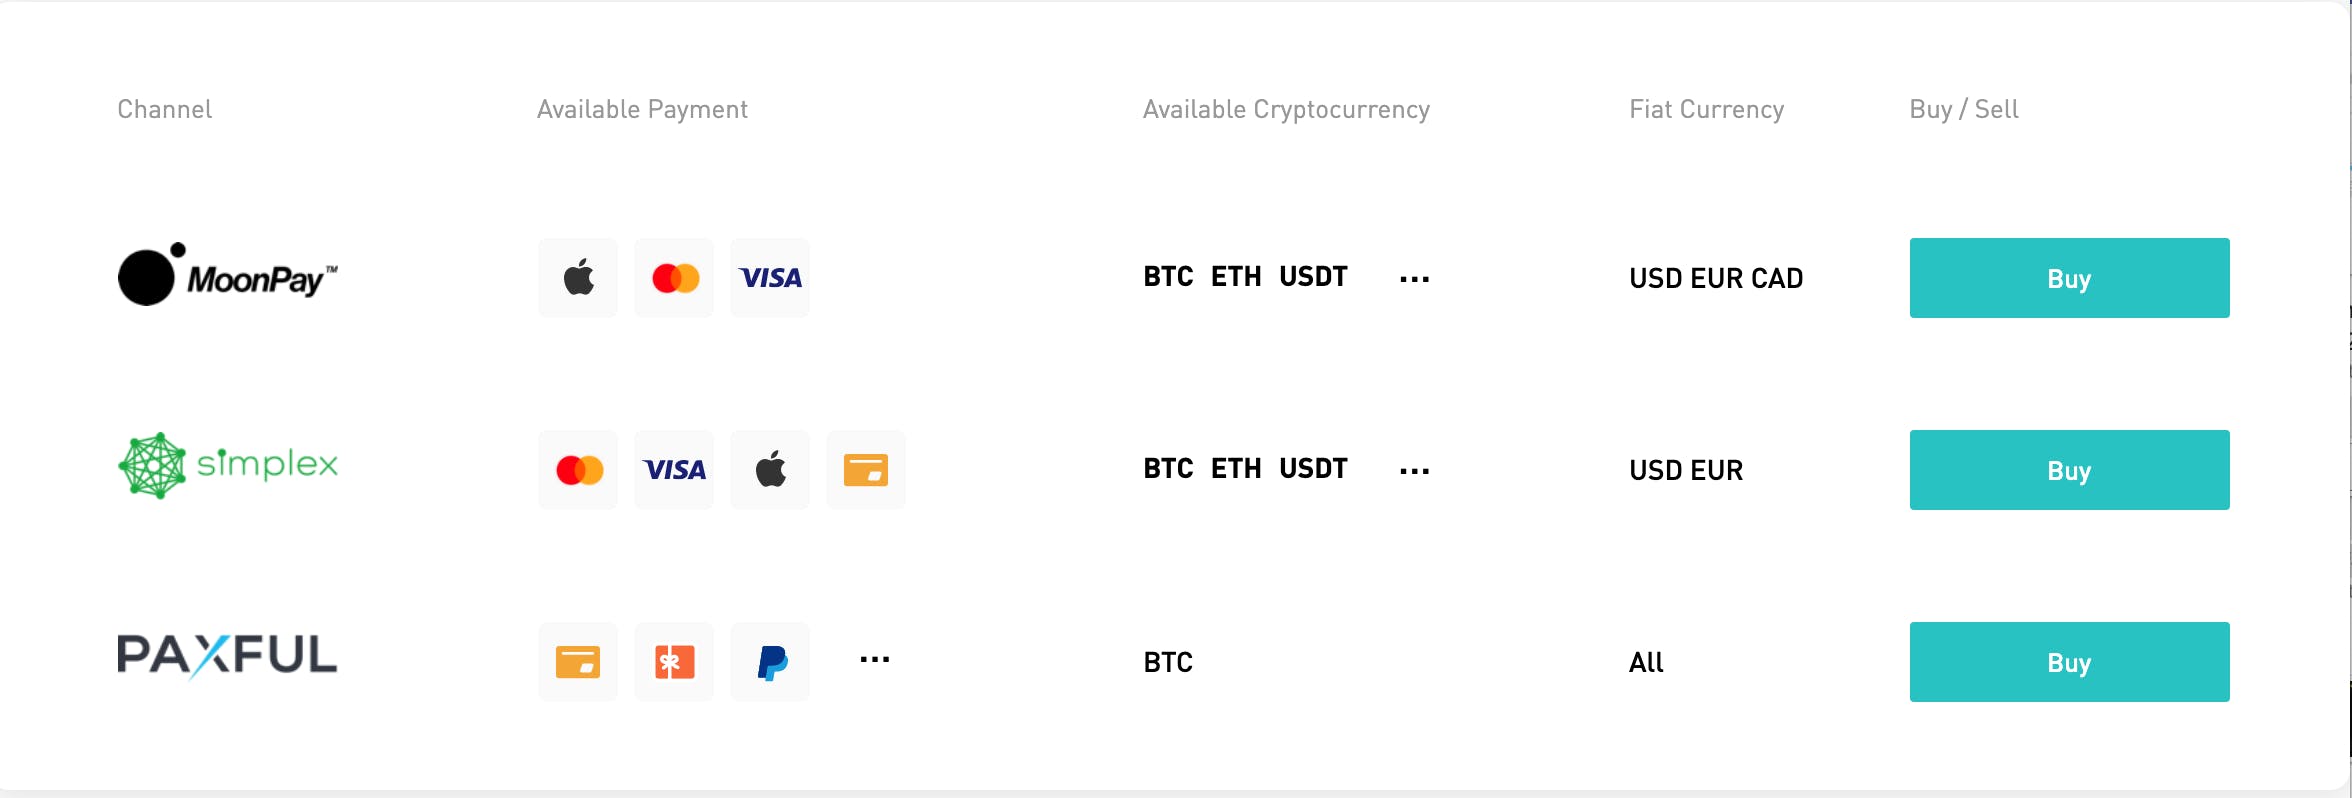 How To Buy Usdt On Bitmart With Credit Card